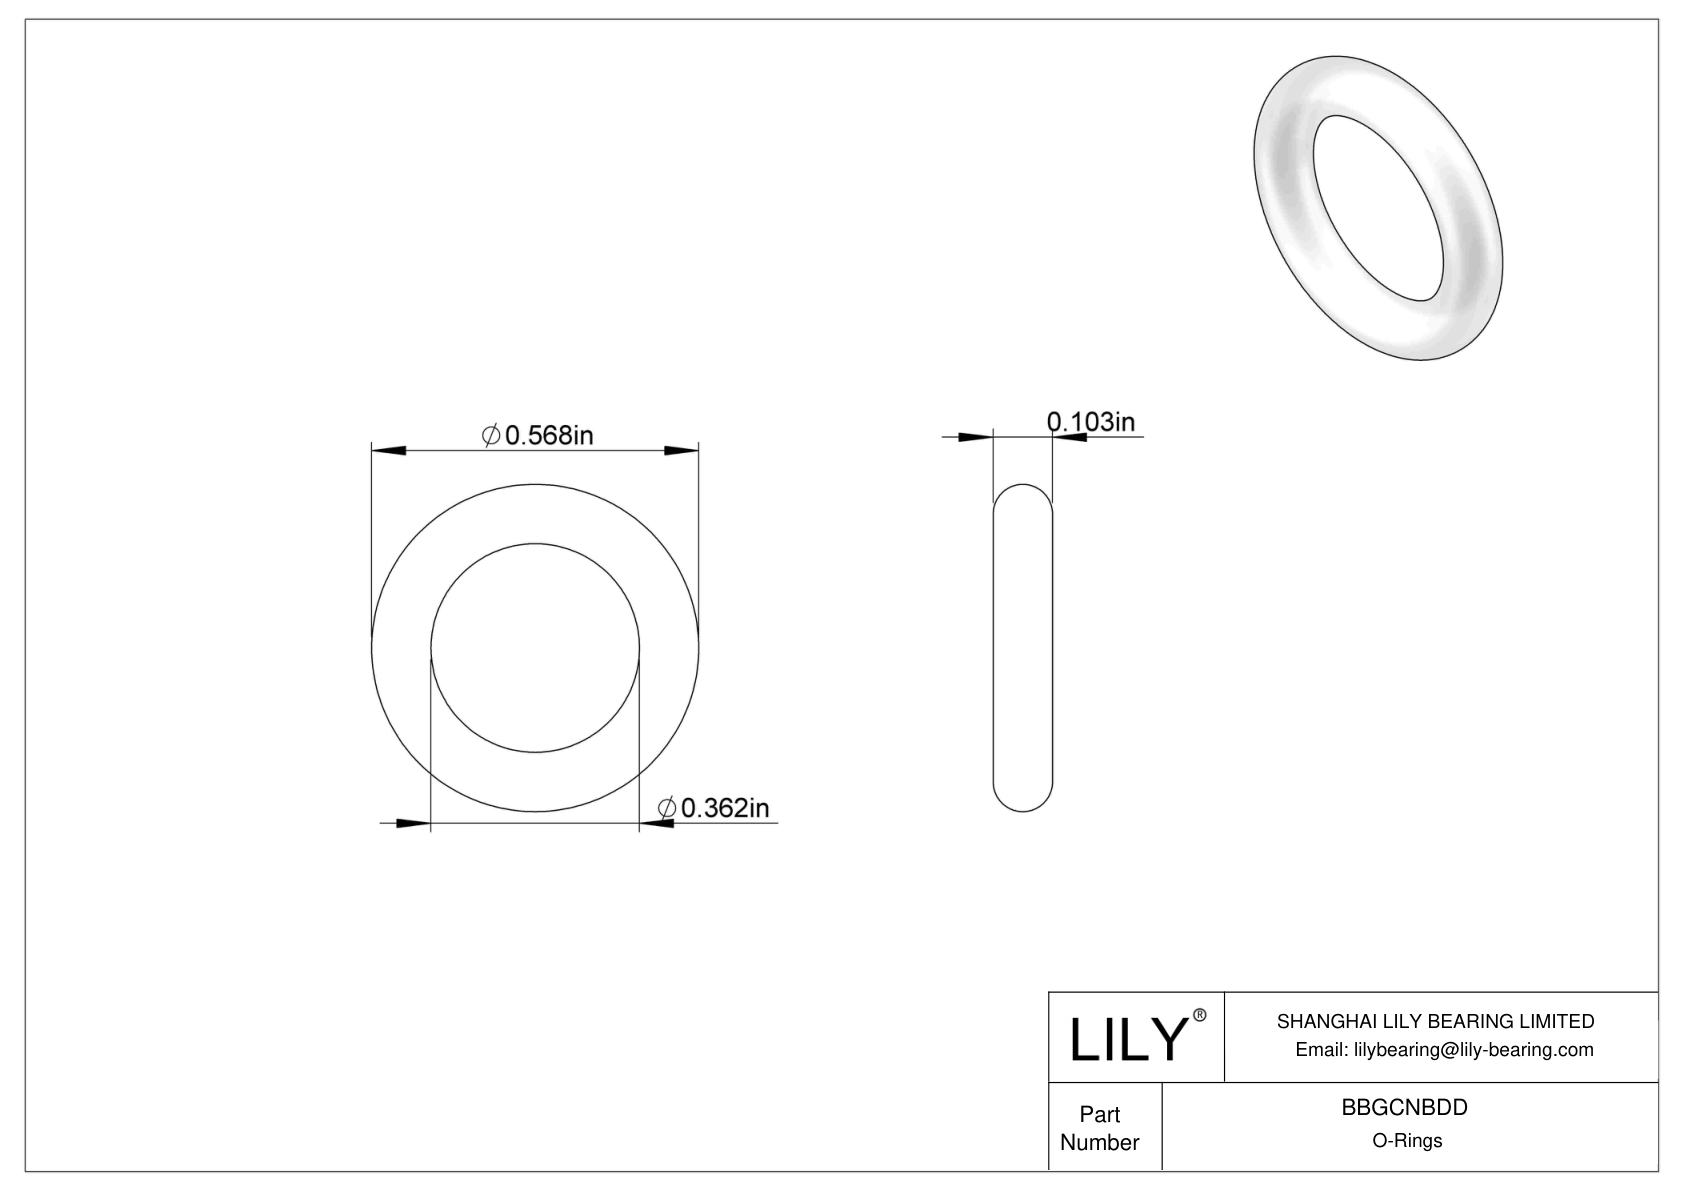 BBGCNBDD High Temperature O-Rings Round cad drawing